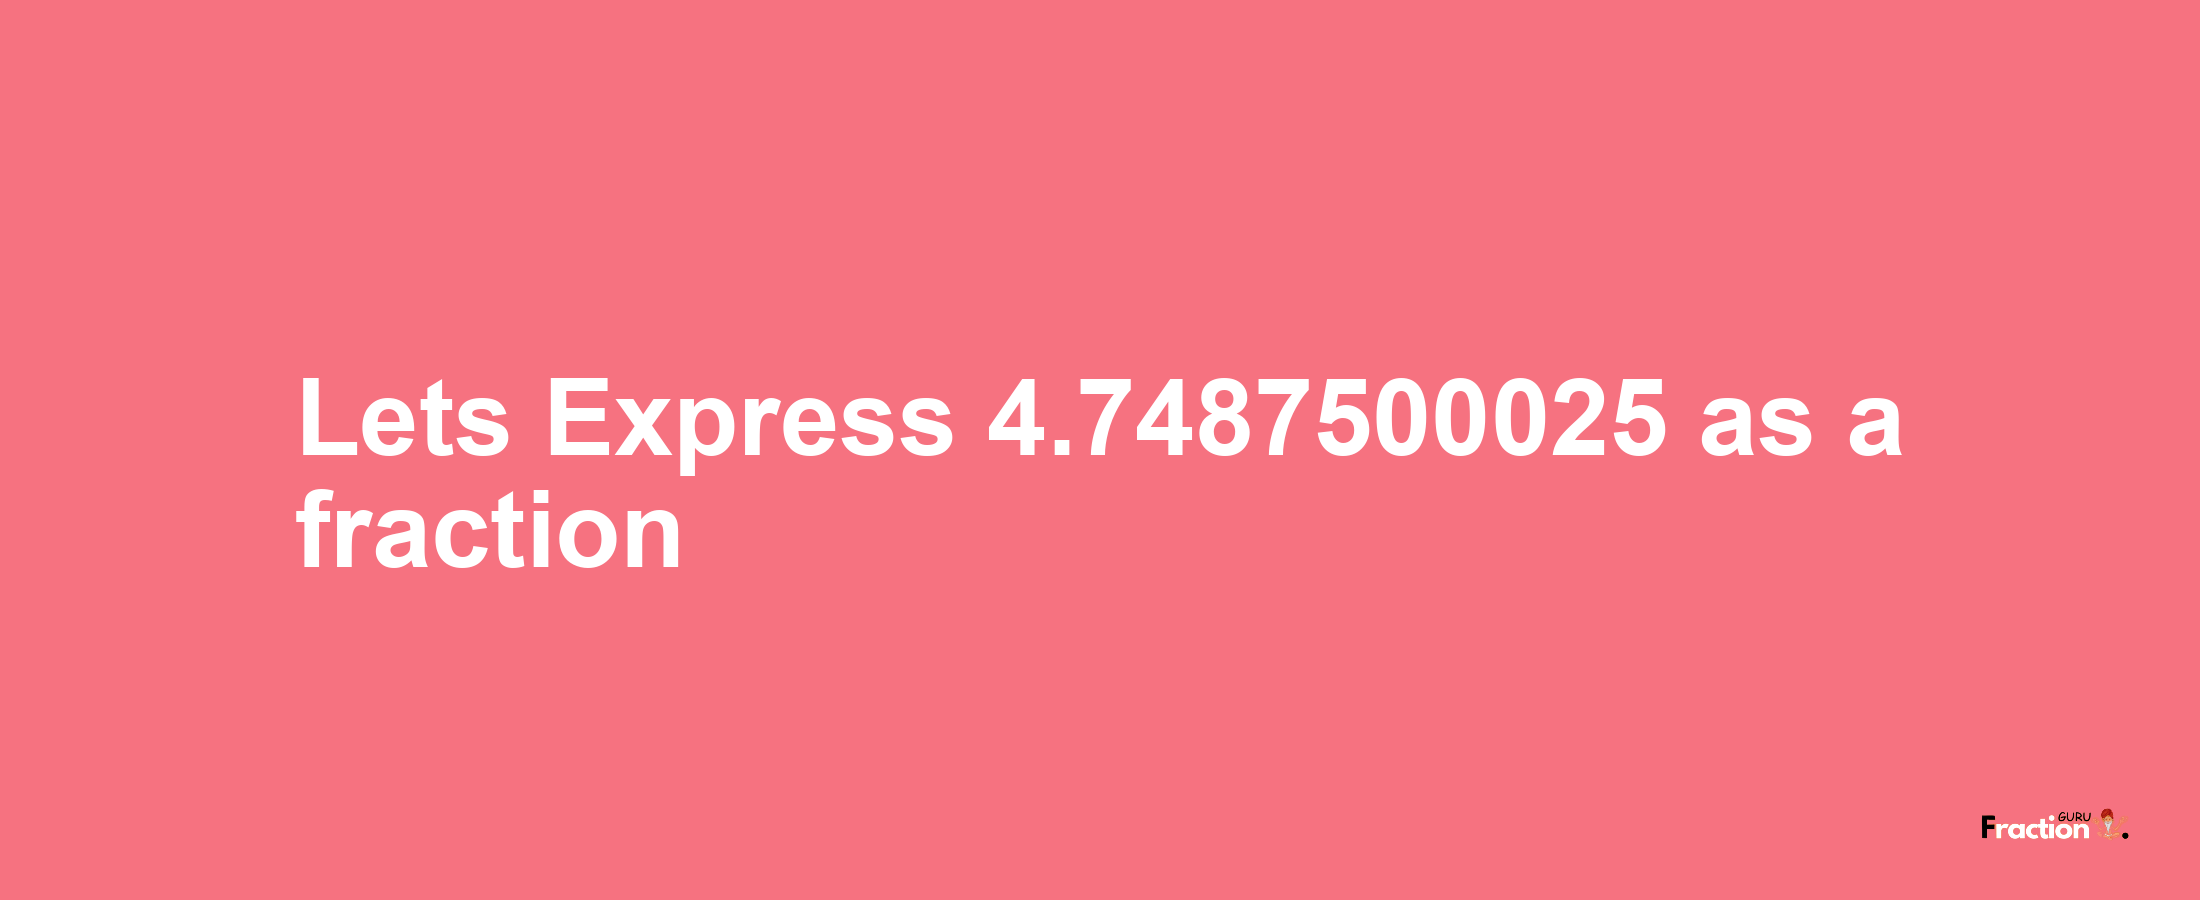 Lets Express 4.7487500025 as afraction